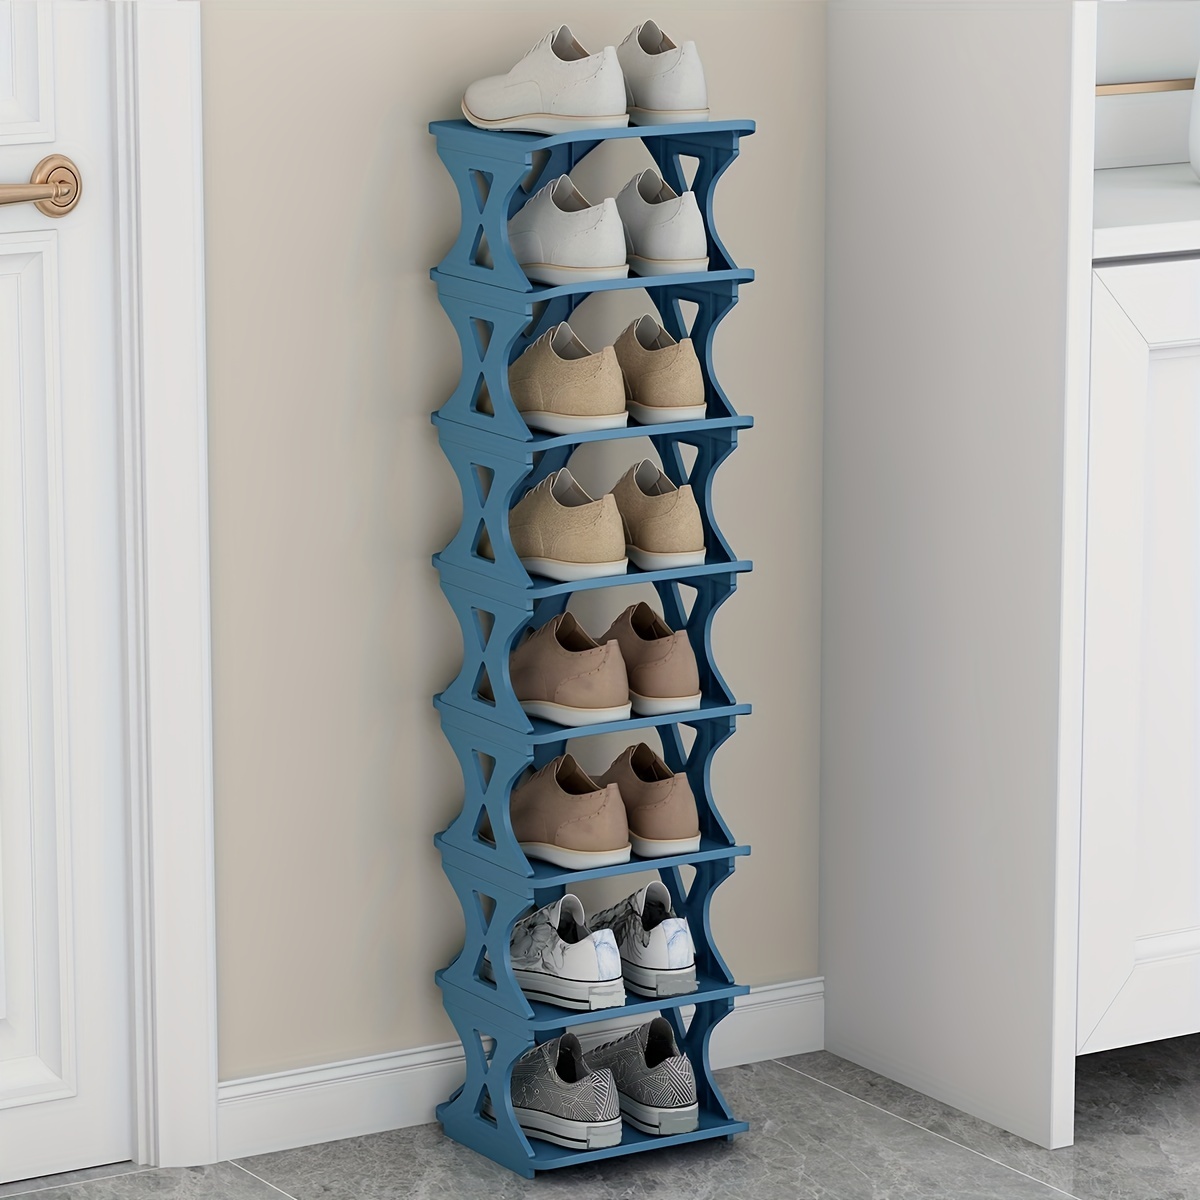 Multi-layer Assembled Shoe Rack Dust-proof Storage Shoe Cabinet Home Shoe  Stand Dormitory Simple Storage Shelf Organizer Holder 